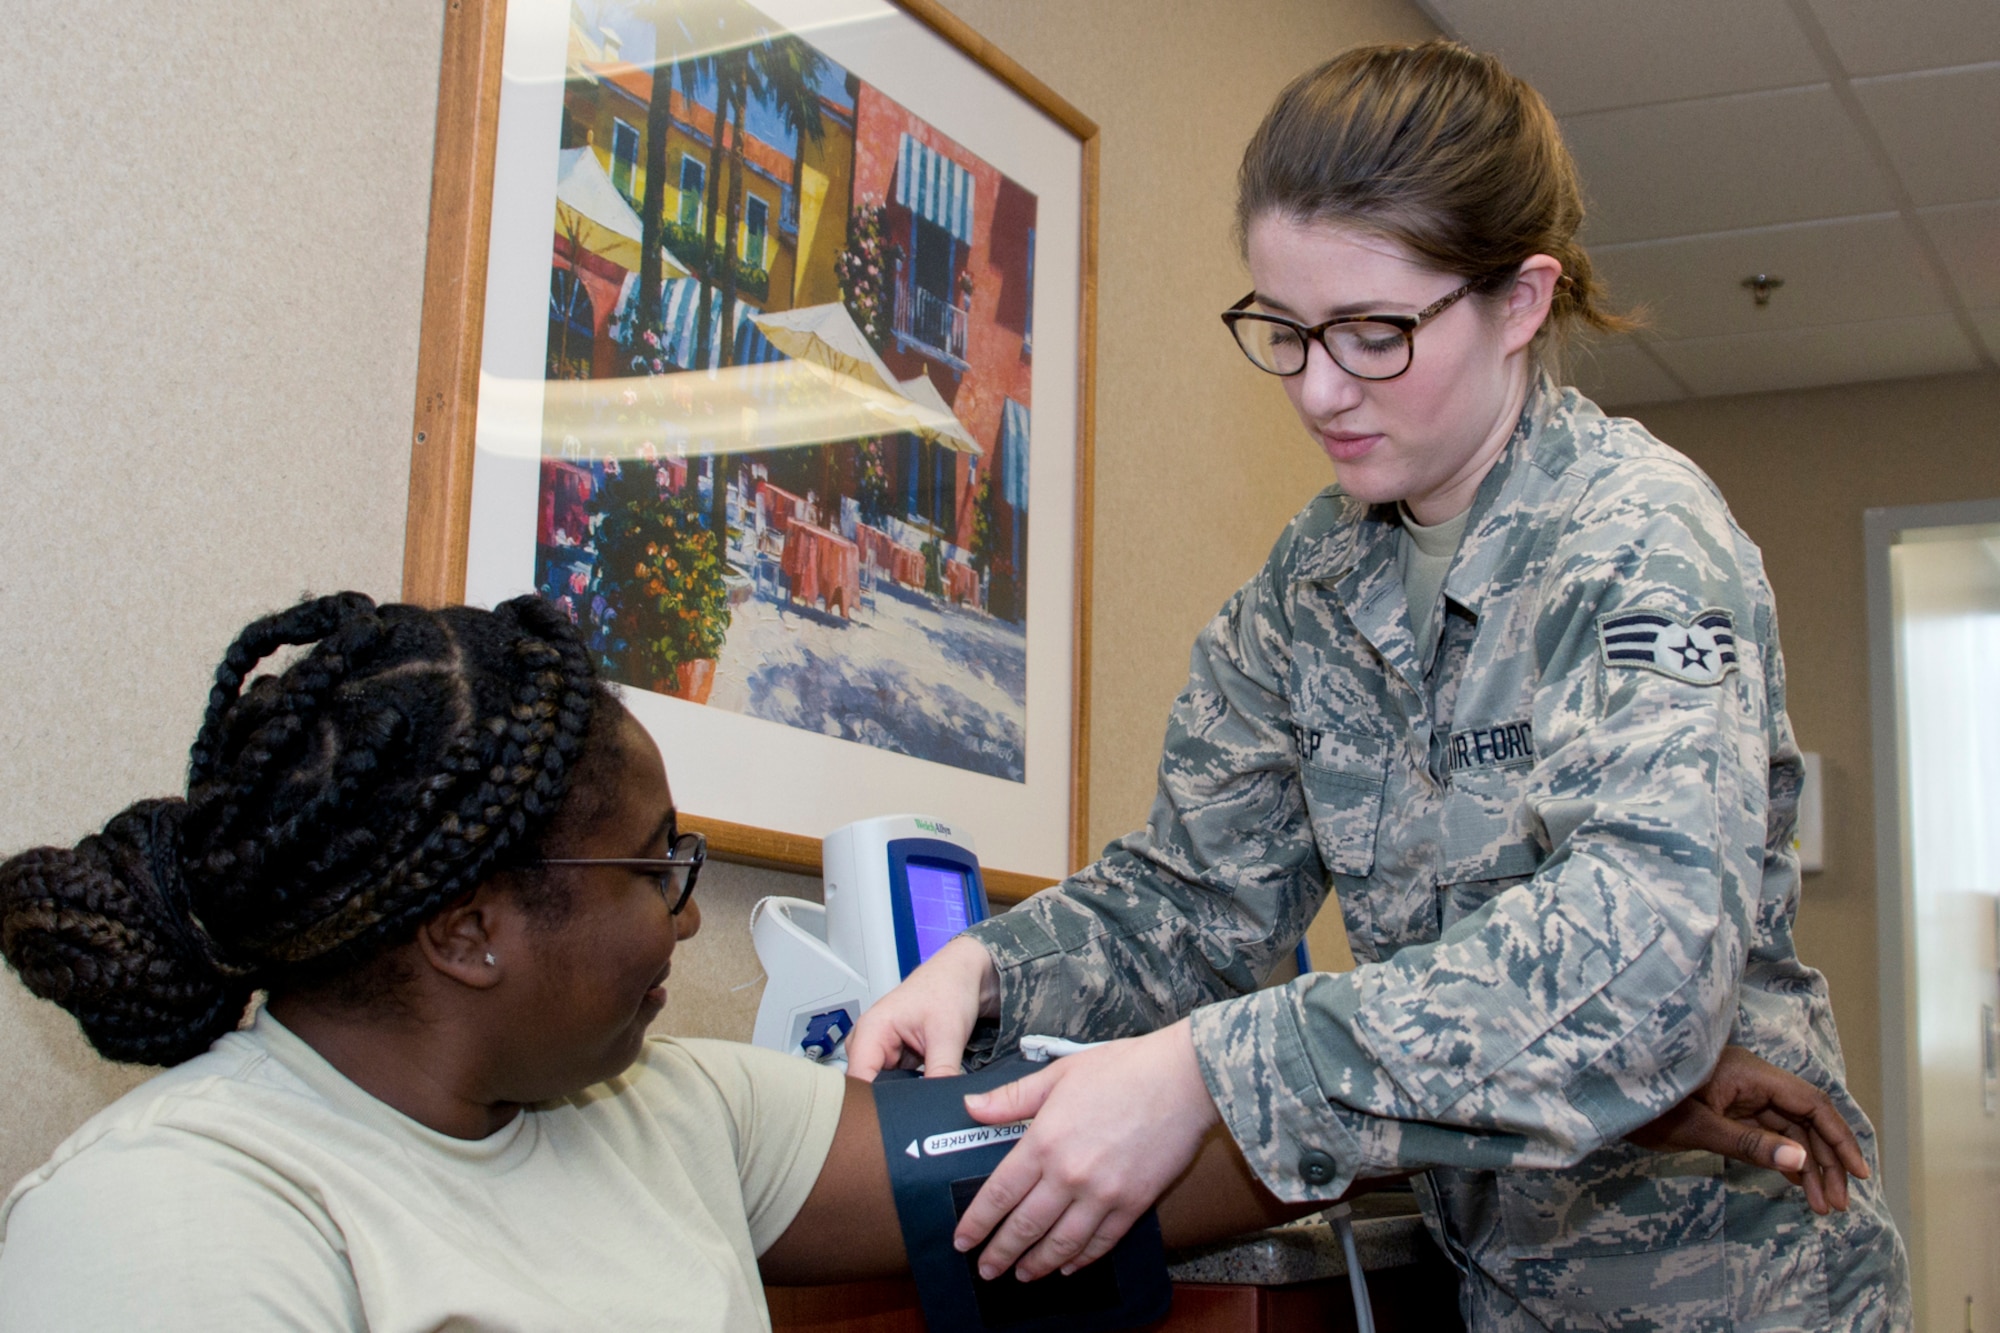 U.S. Air Force Reserve Senior Airman Alexandra Delp, a 913th Aerospace Medical Squadron dental technician, takes the blood pressure of Senior Airman Arnetta Porter, an air transportation journeyman assigned to the 96th Aerial Port Squadron, before her dental examination during the Unit Training Assembly weekend at Little Rock Air Force Base, Ark., Aug. 5, 2017. The medical squadron helps ensure 913th Airlift Group Airmen meet medical requirents to be deployed worldwide. (U.S. Air Force photo by Master Sgt. Jeff Walston/Released)